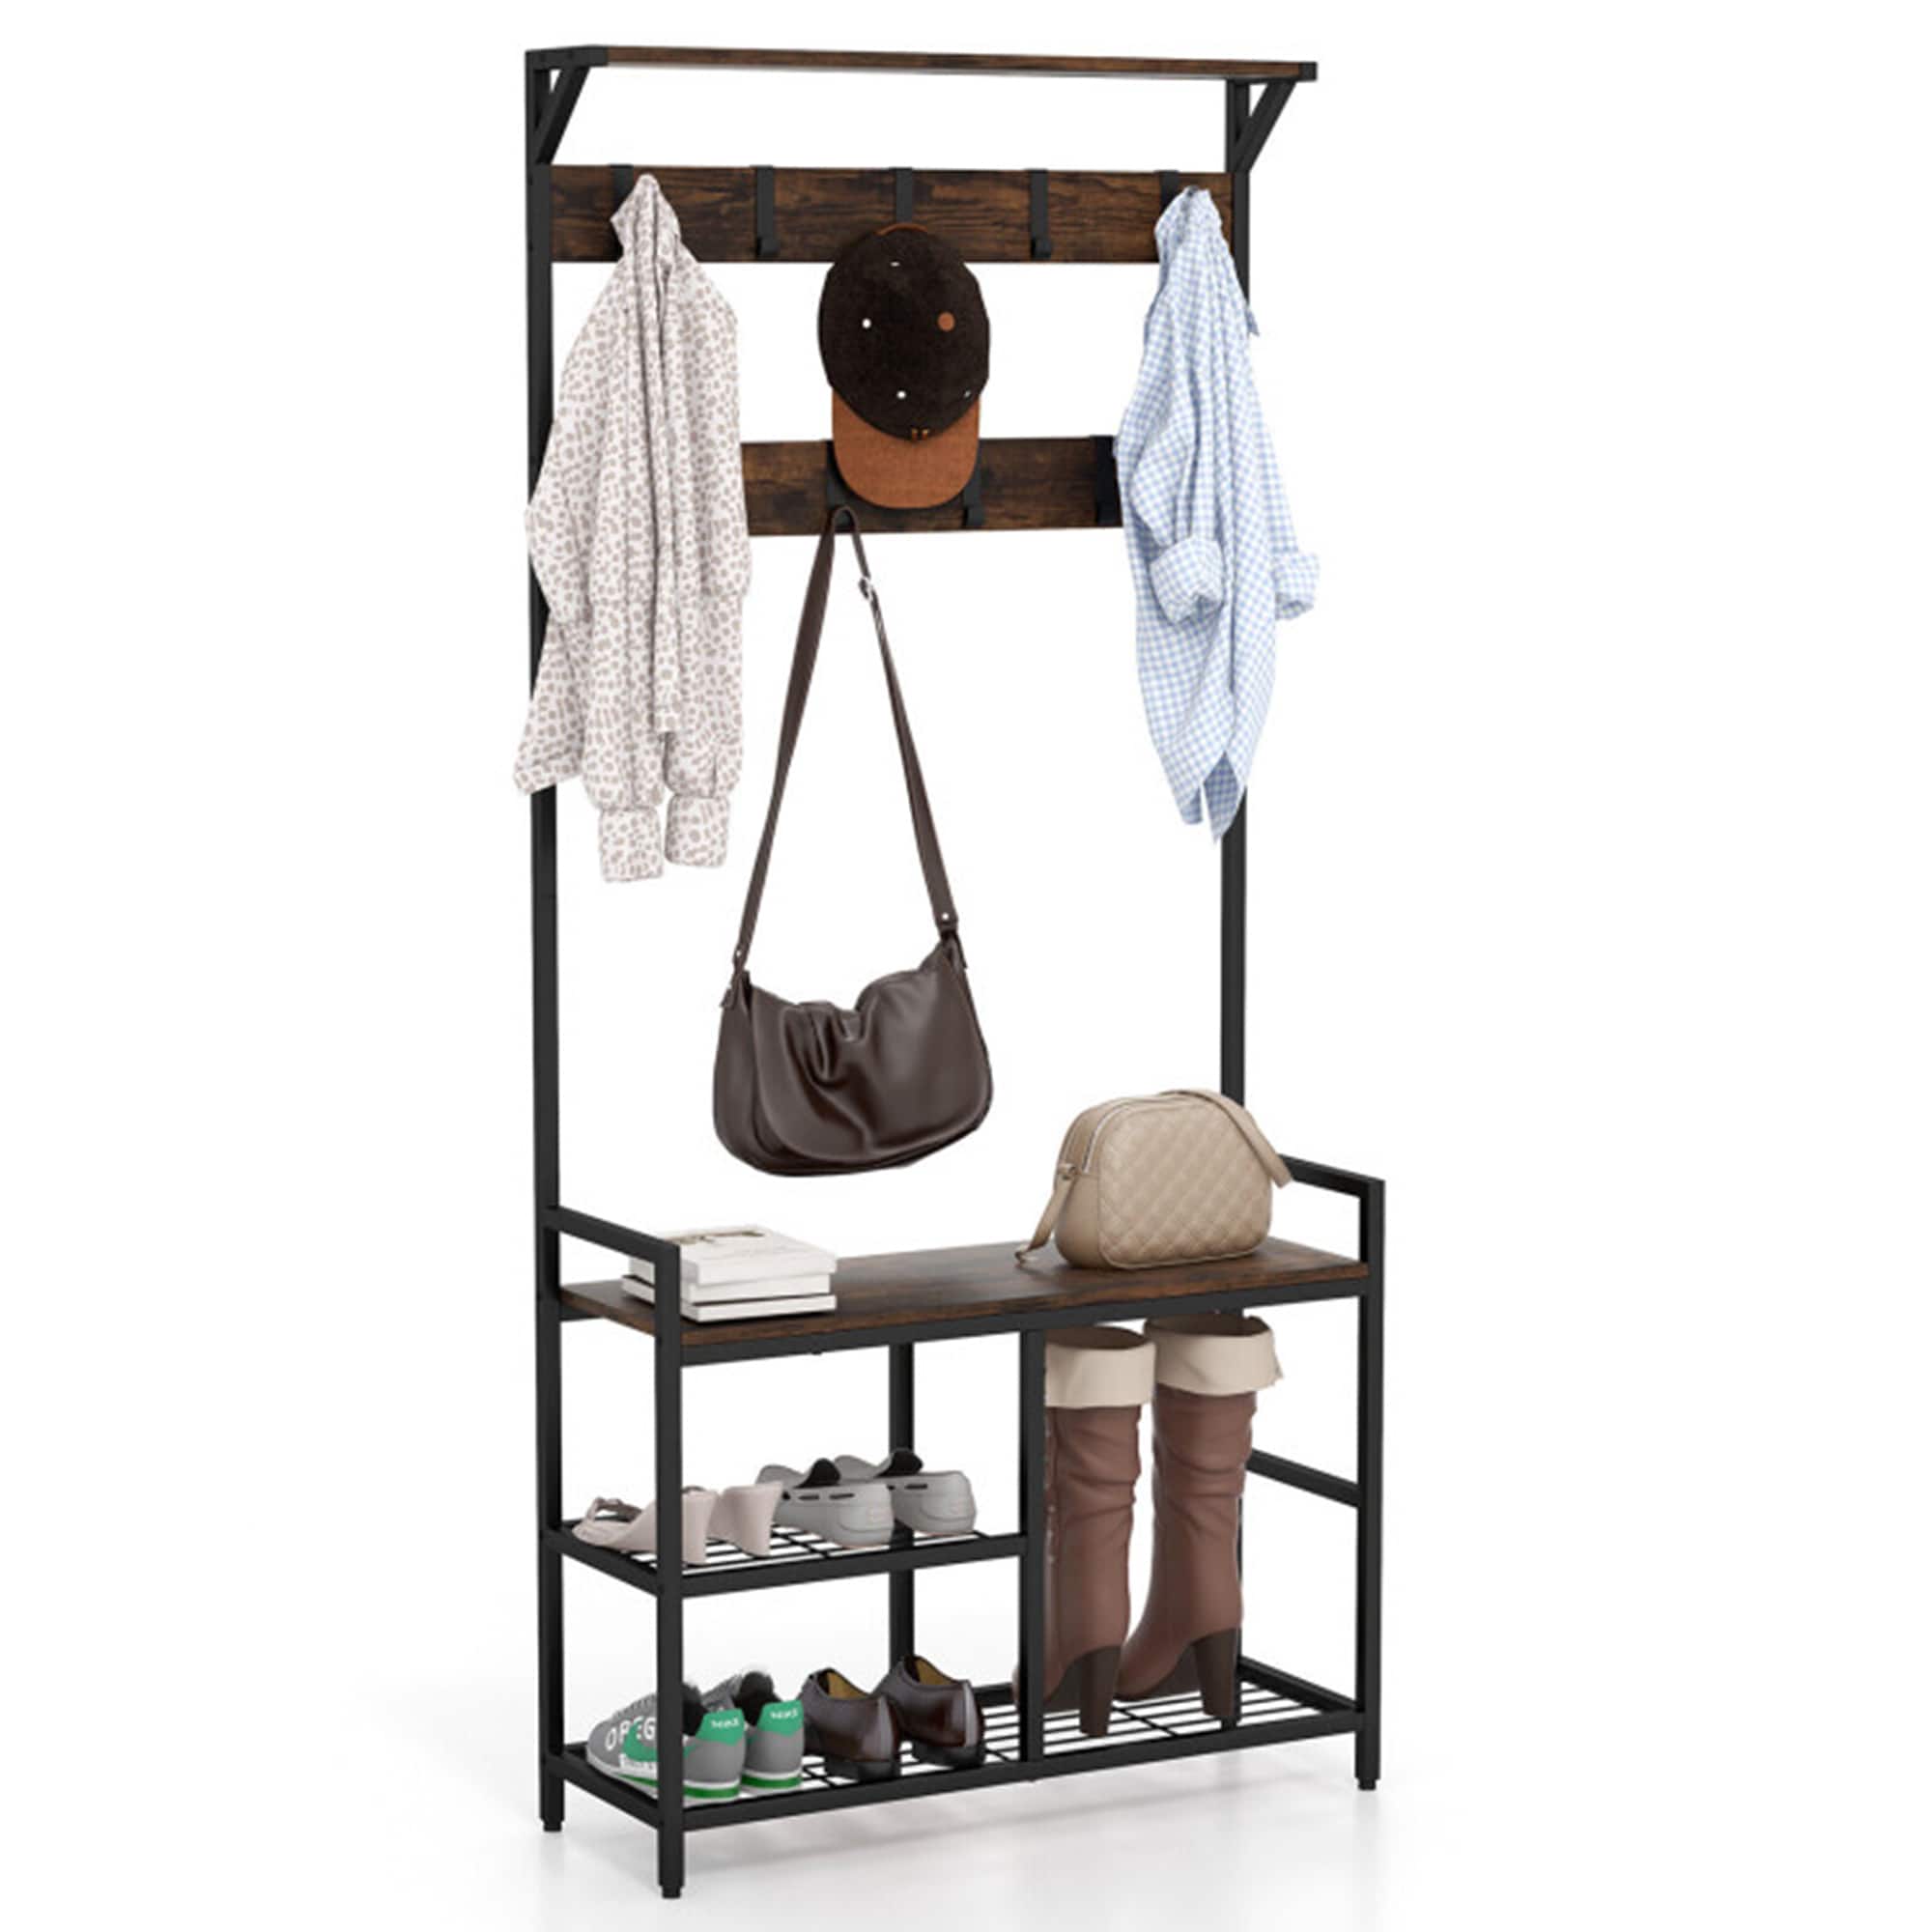 Clihome 3-in-1 Multi-Functional Clothes Rack Bench Black and Brown